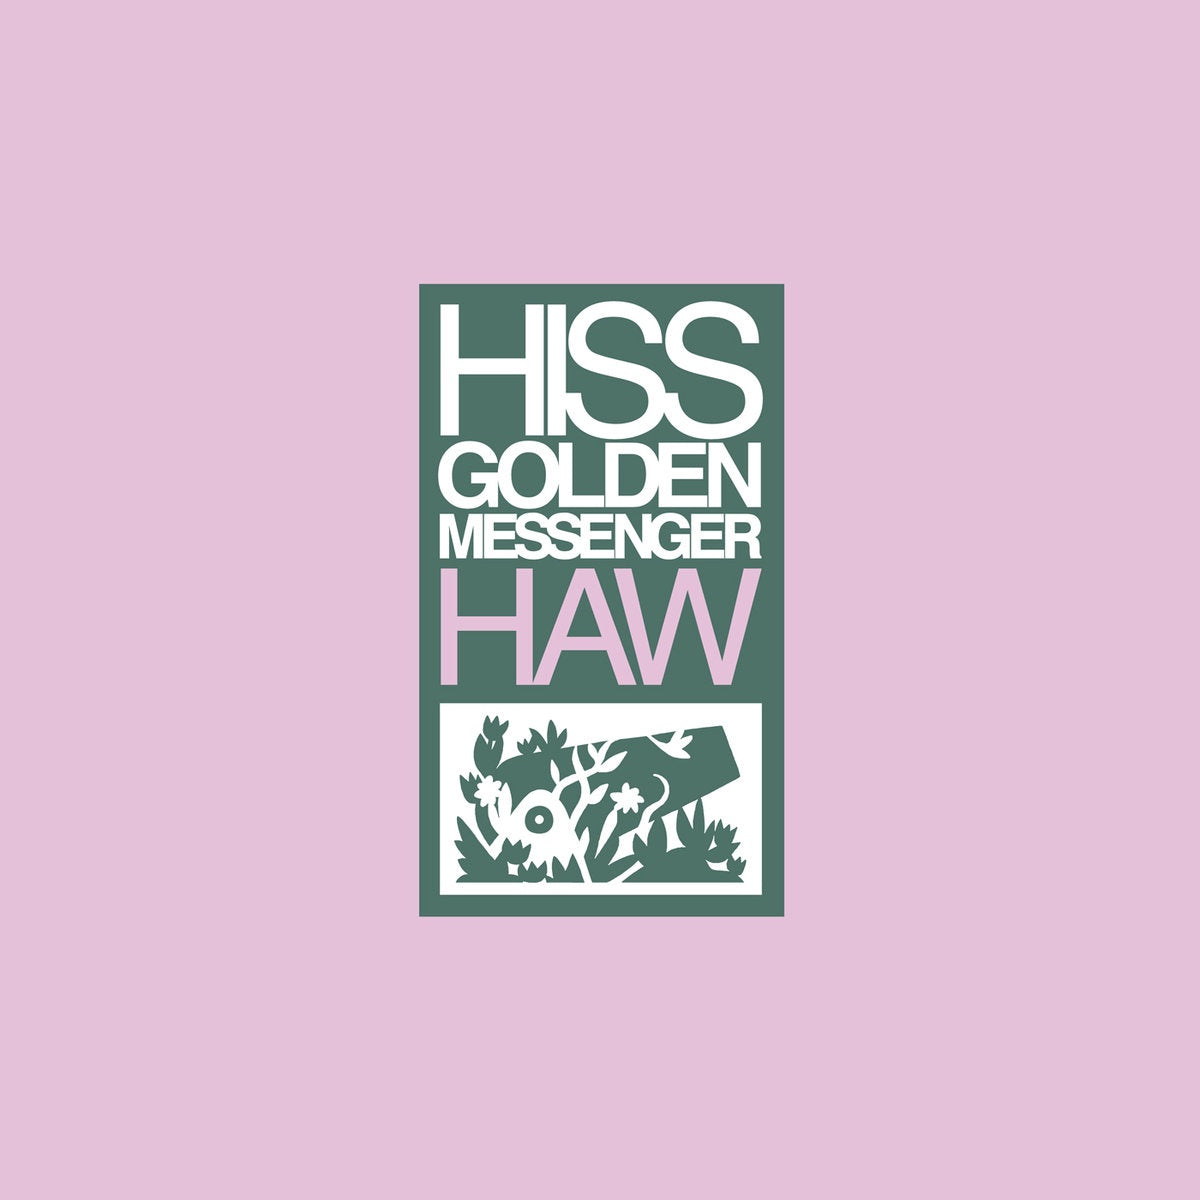 Hiss Golden Messenger - Haw (2013) - New LP Record 2018 Merge USA Vinyl & Download - Psychedelic Rock / Folk Rock / Country Rock